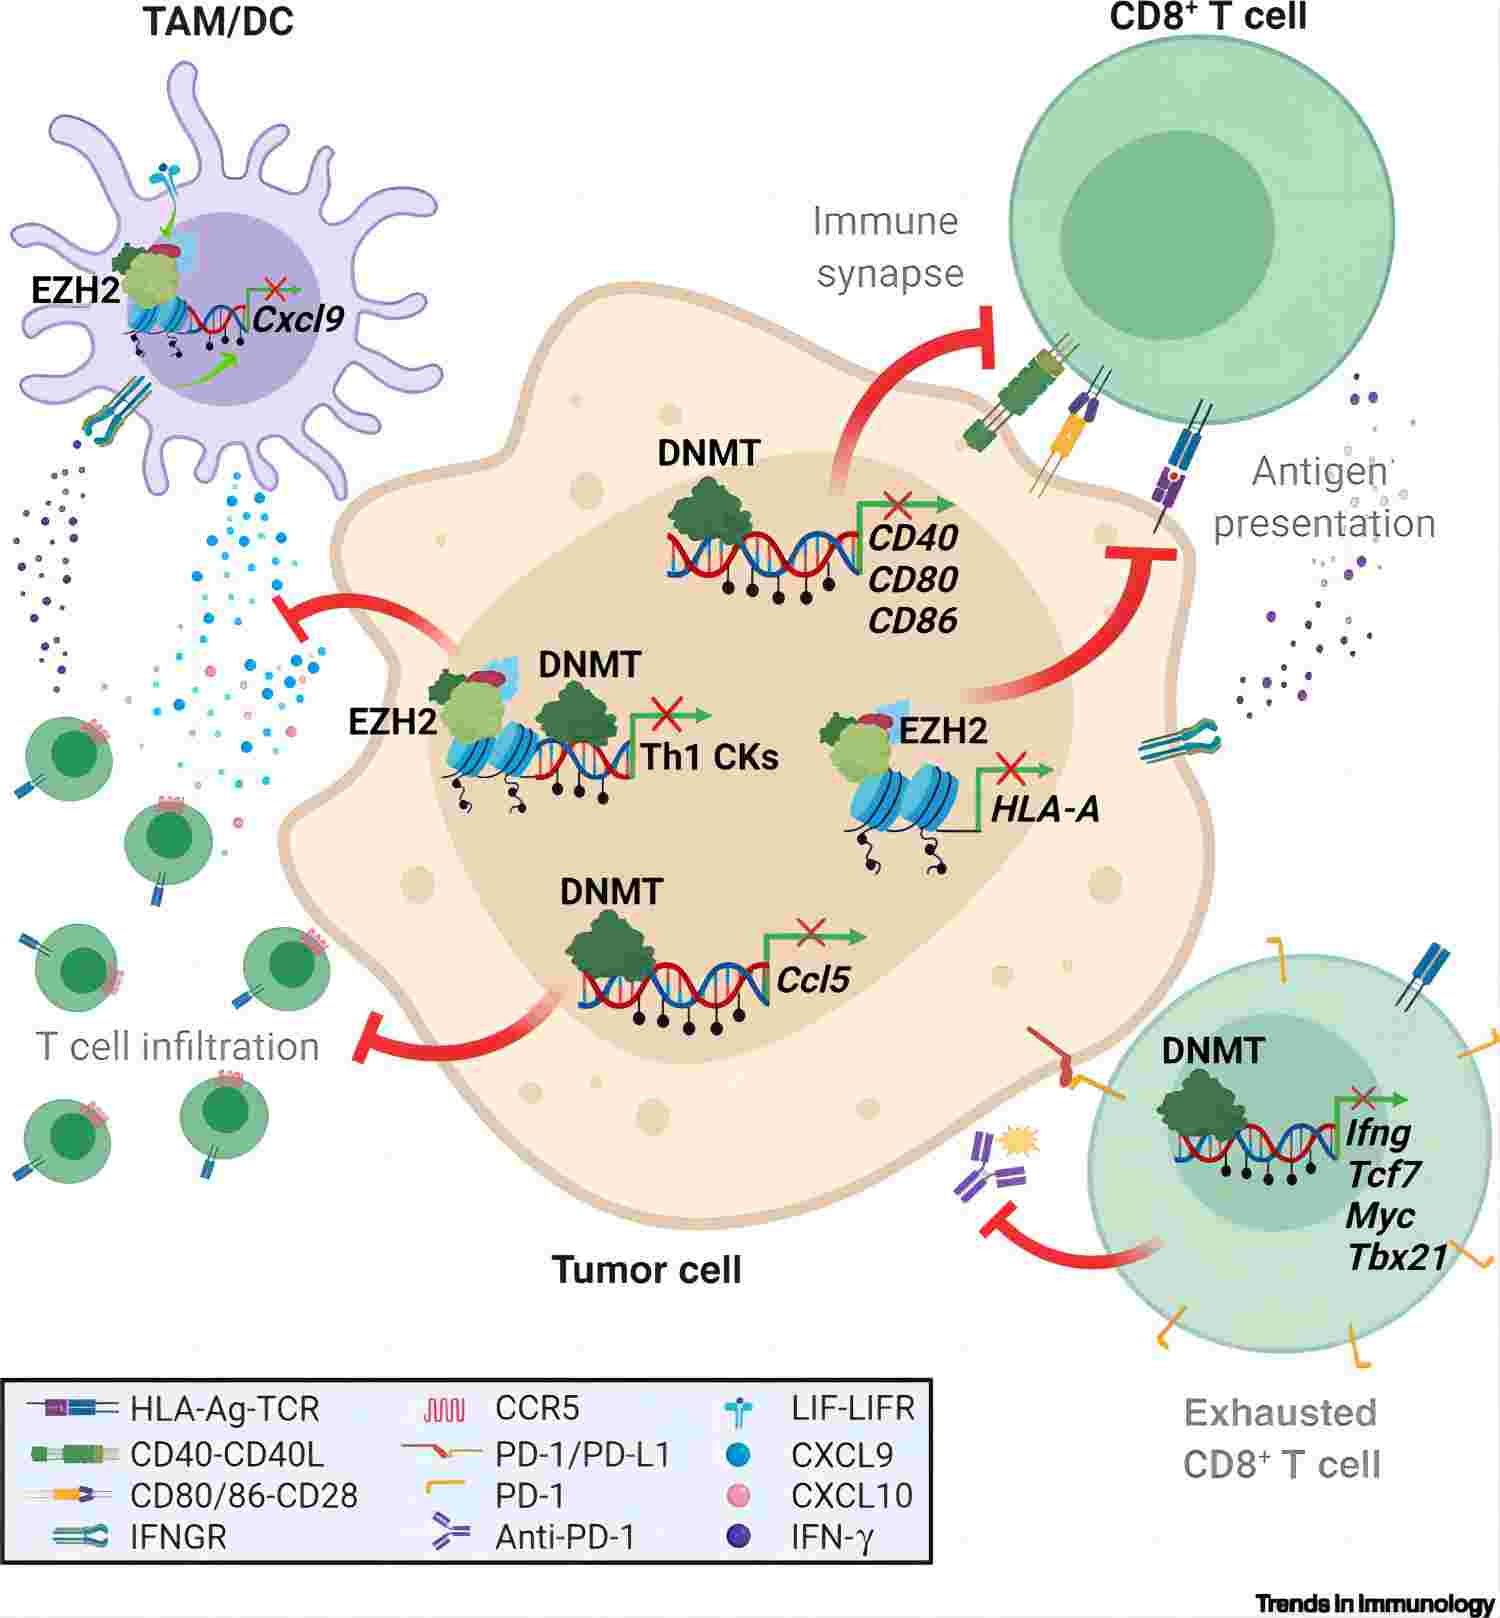 Epigenetic insights into the tumor microenvironment: implications for cancer immunotherapy. (Villanueva, et al., 2020)